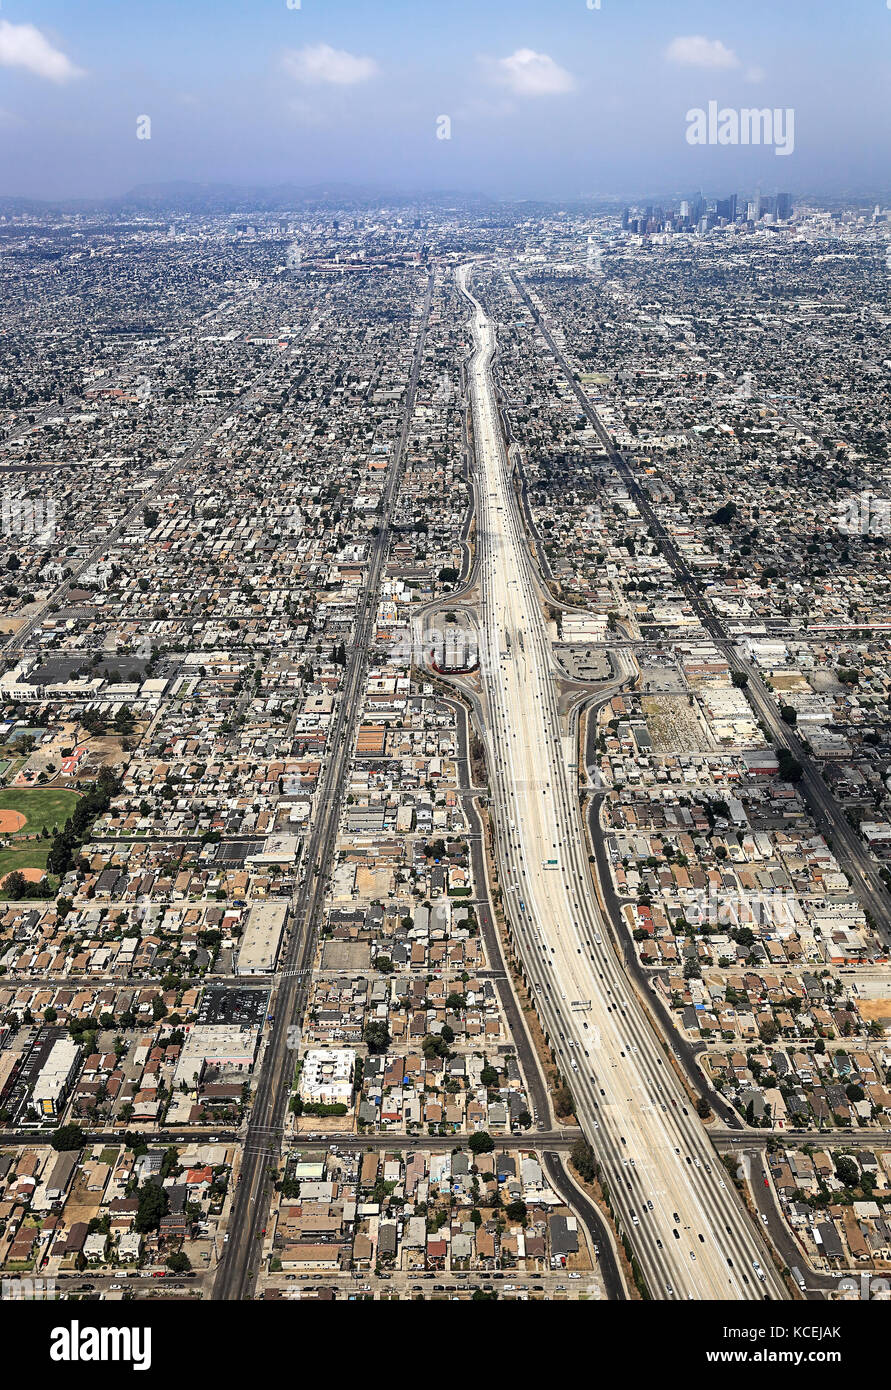 Aerial view of the city of Los Angeles Stock Photo